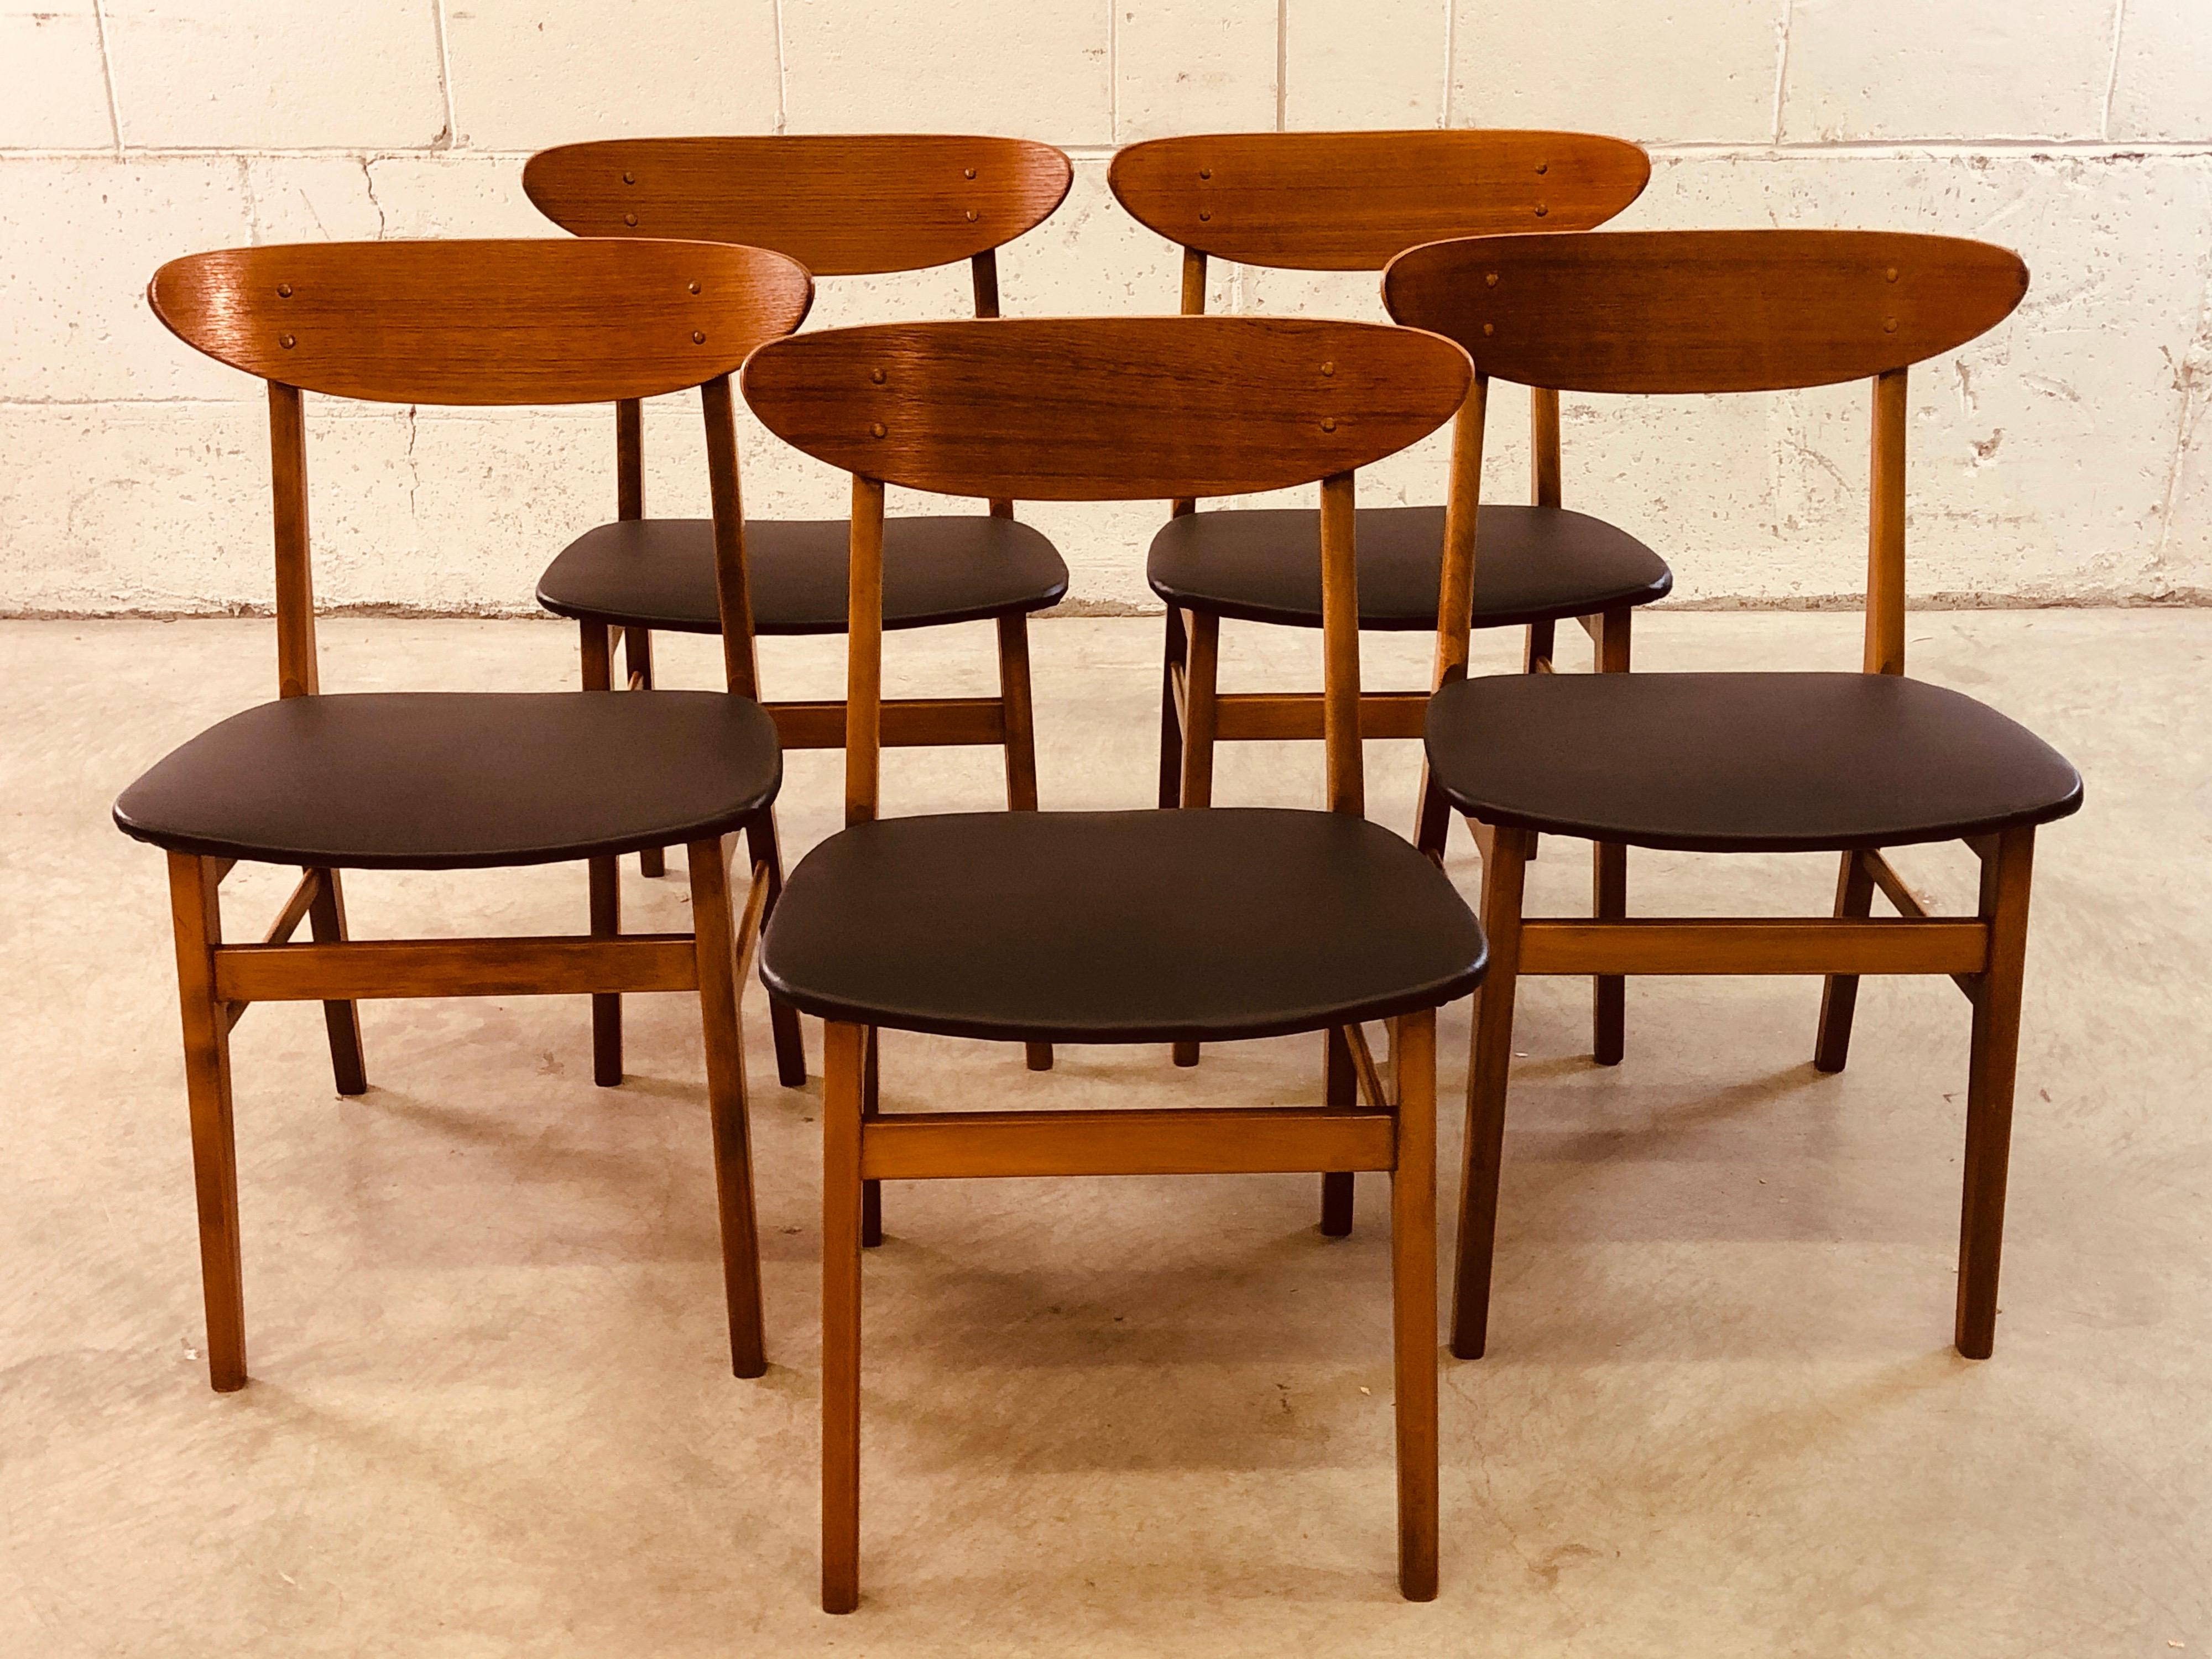 Vintage Danish modern Farstrup Mobler set of five dining chairs on a beech frame with a curved teak surfboard backrest. Chairs have been refinished and restored with new black Naugahyde seats. Marked underneath. Excellent condition.